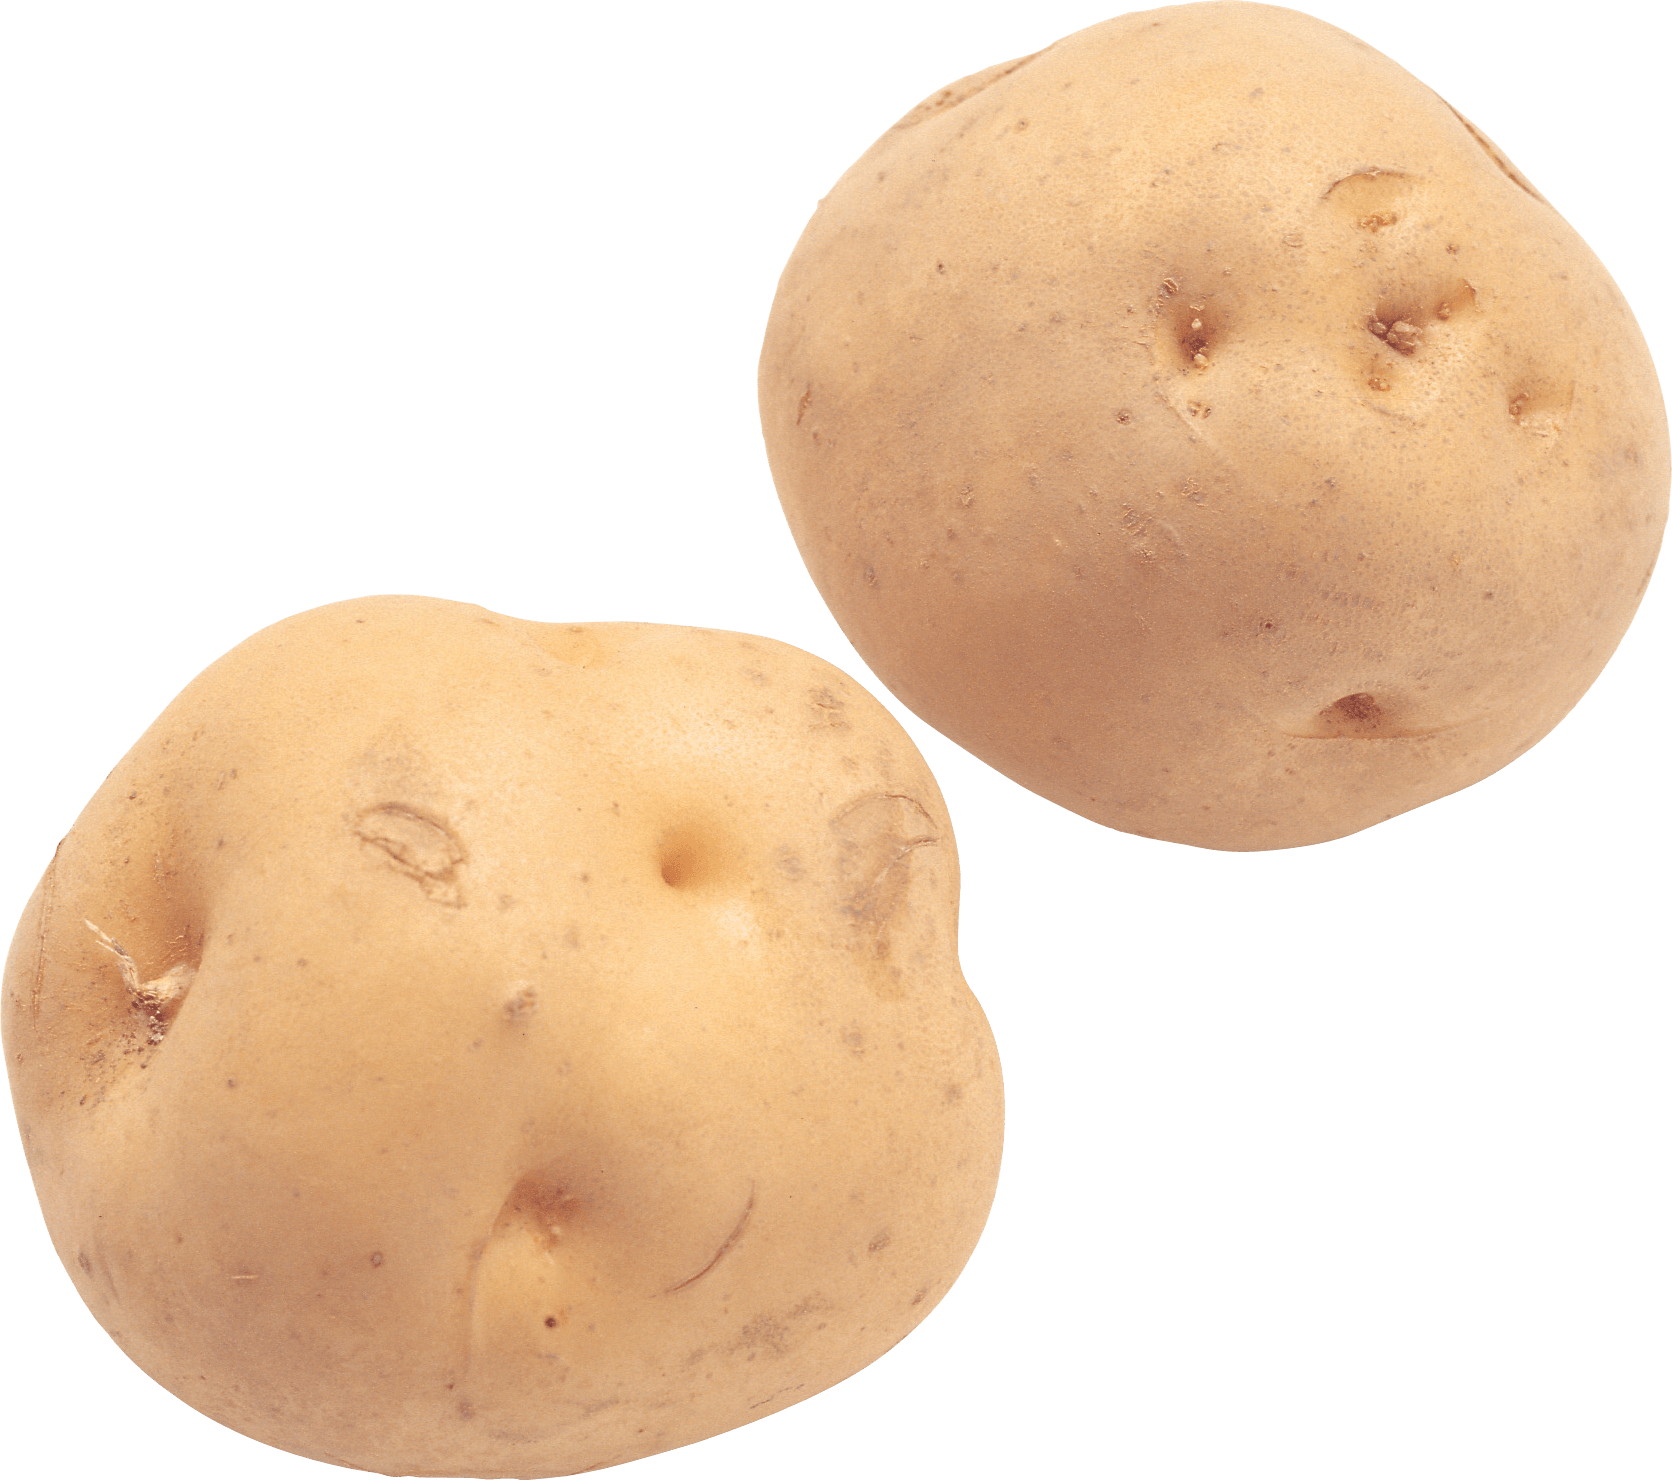 Png images transparent free. Potato clipart high resolution